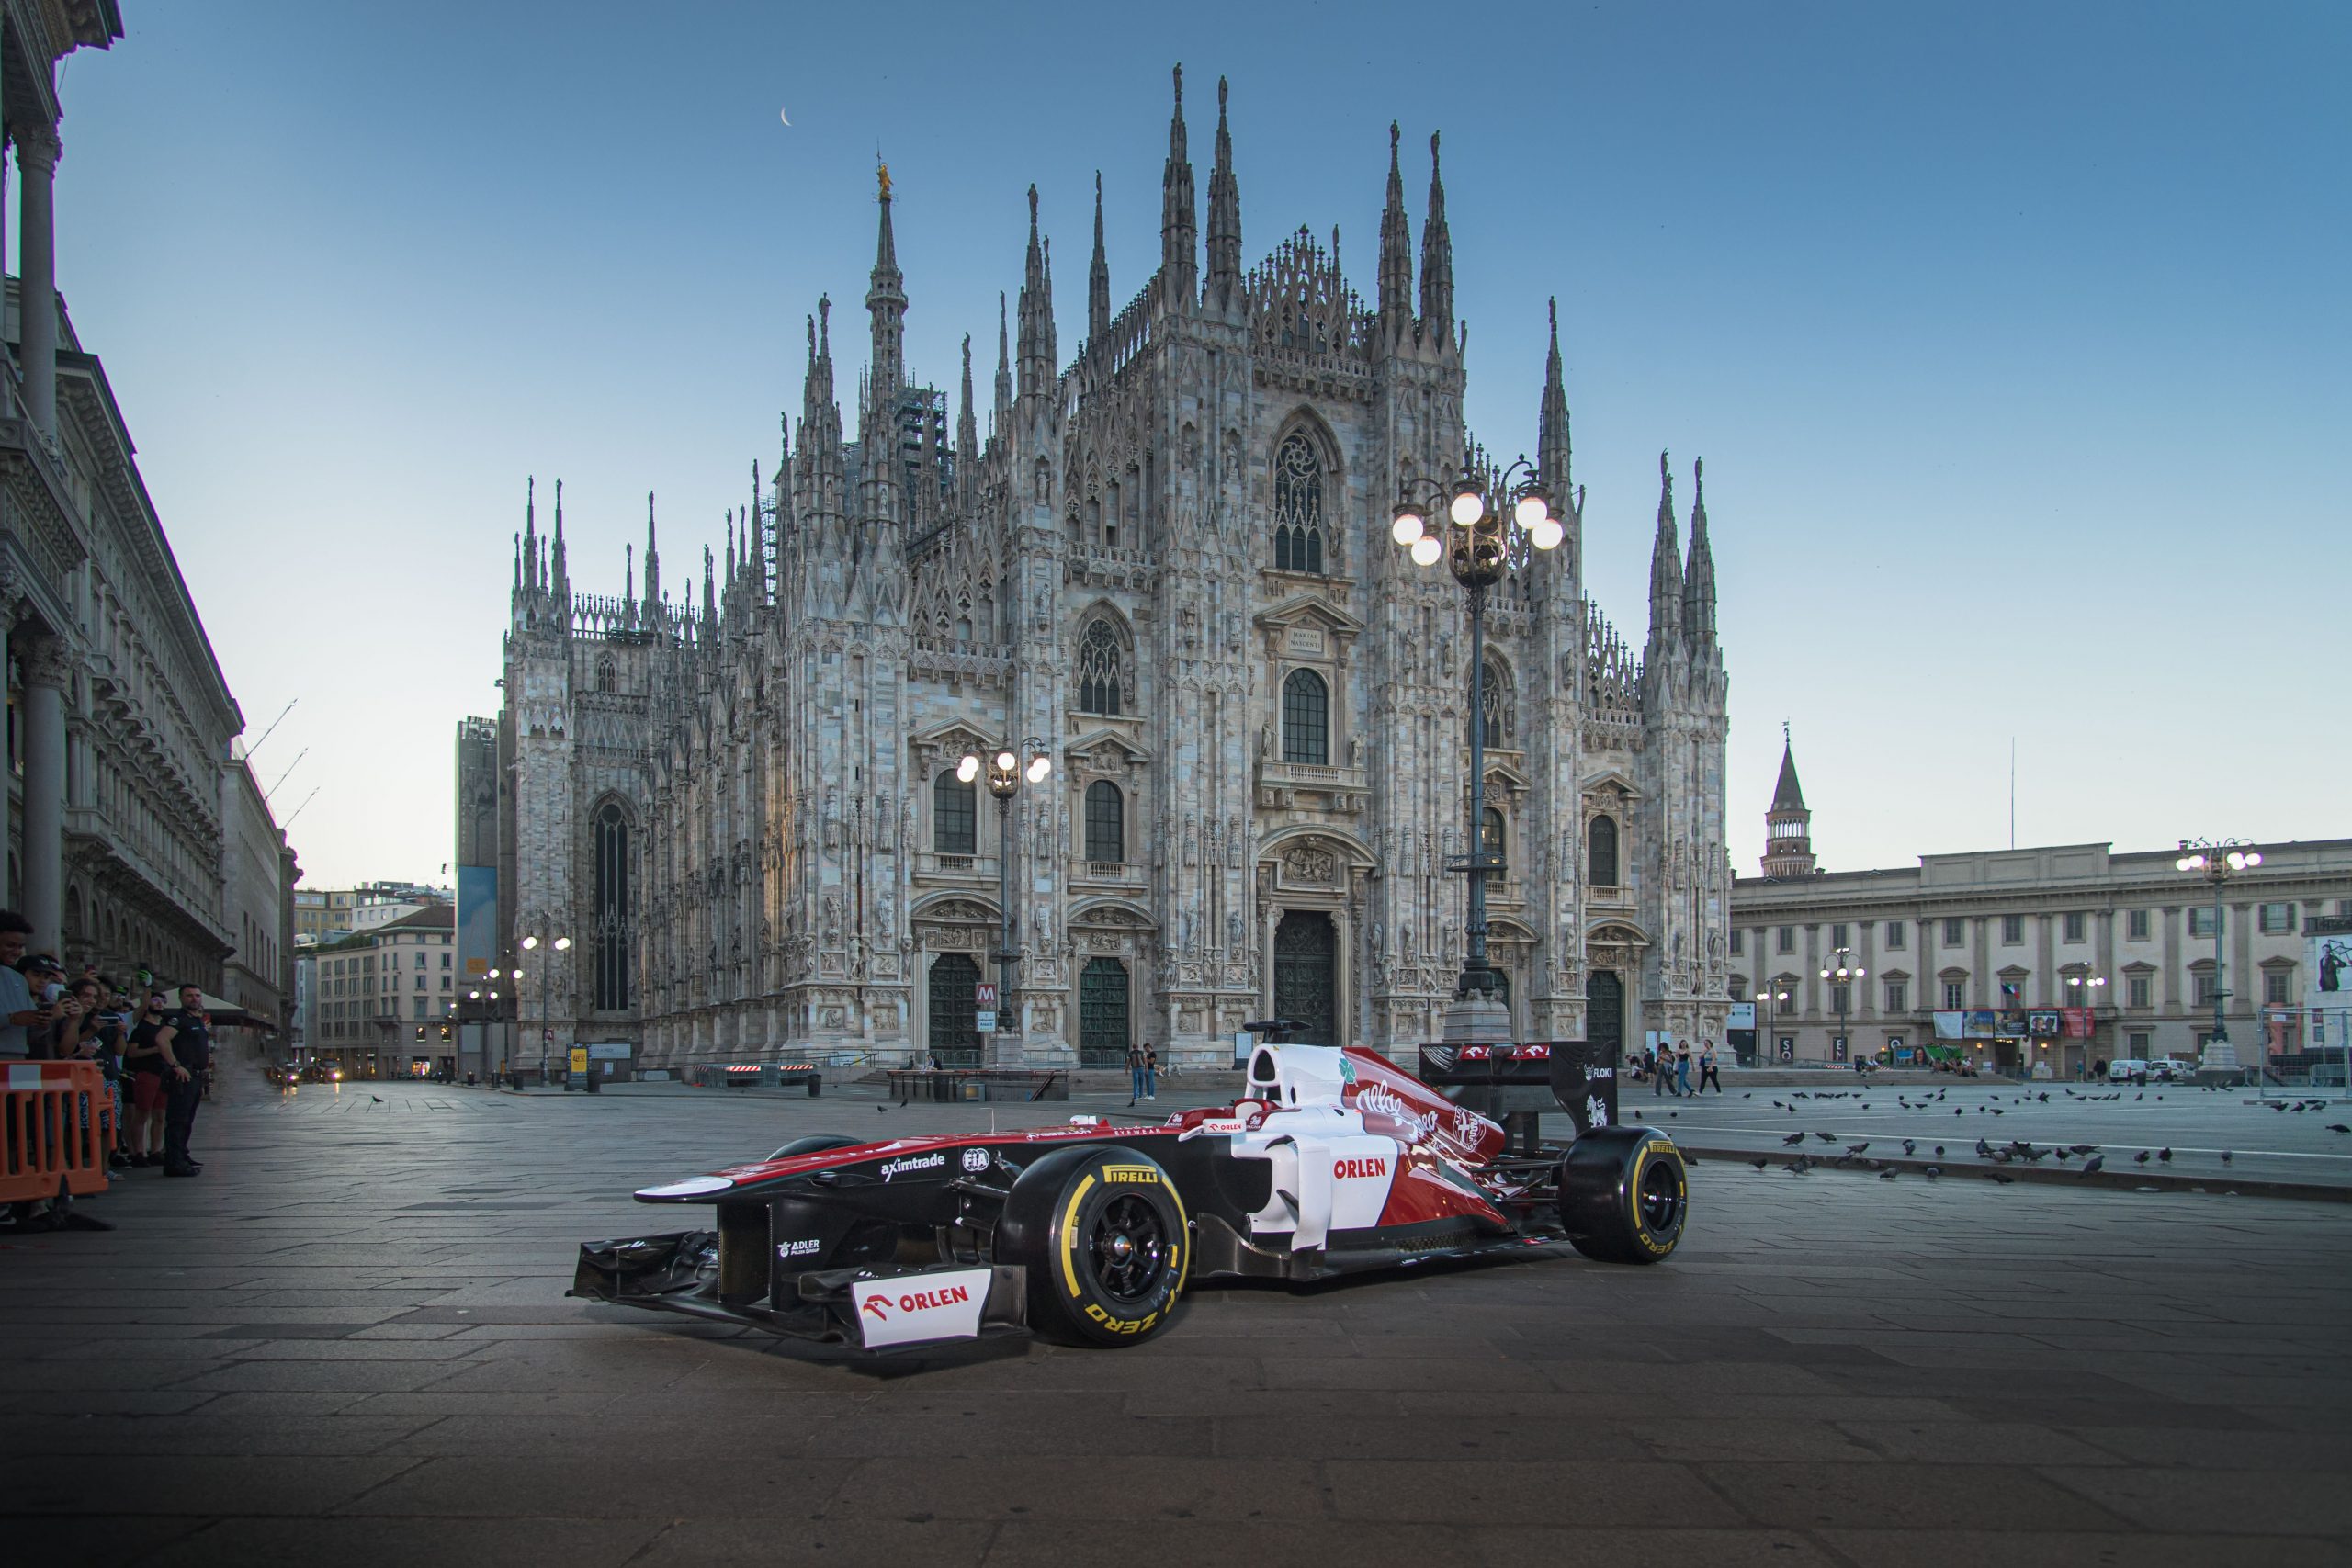 Alfa Romeo wakes up Milan with F1 on the day of its 112th Anniversary